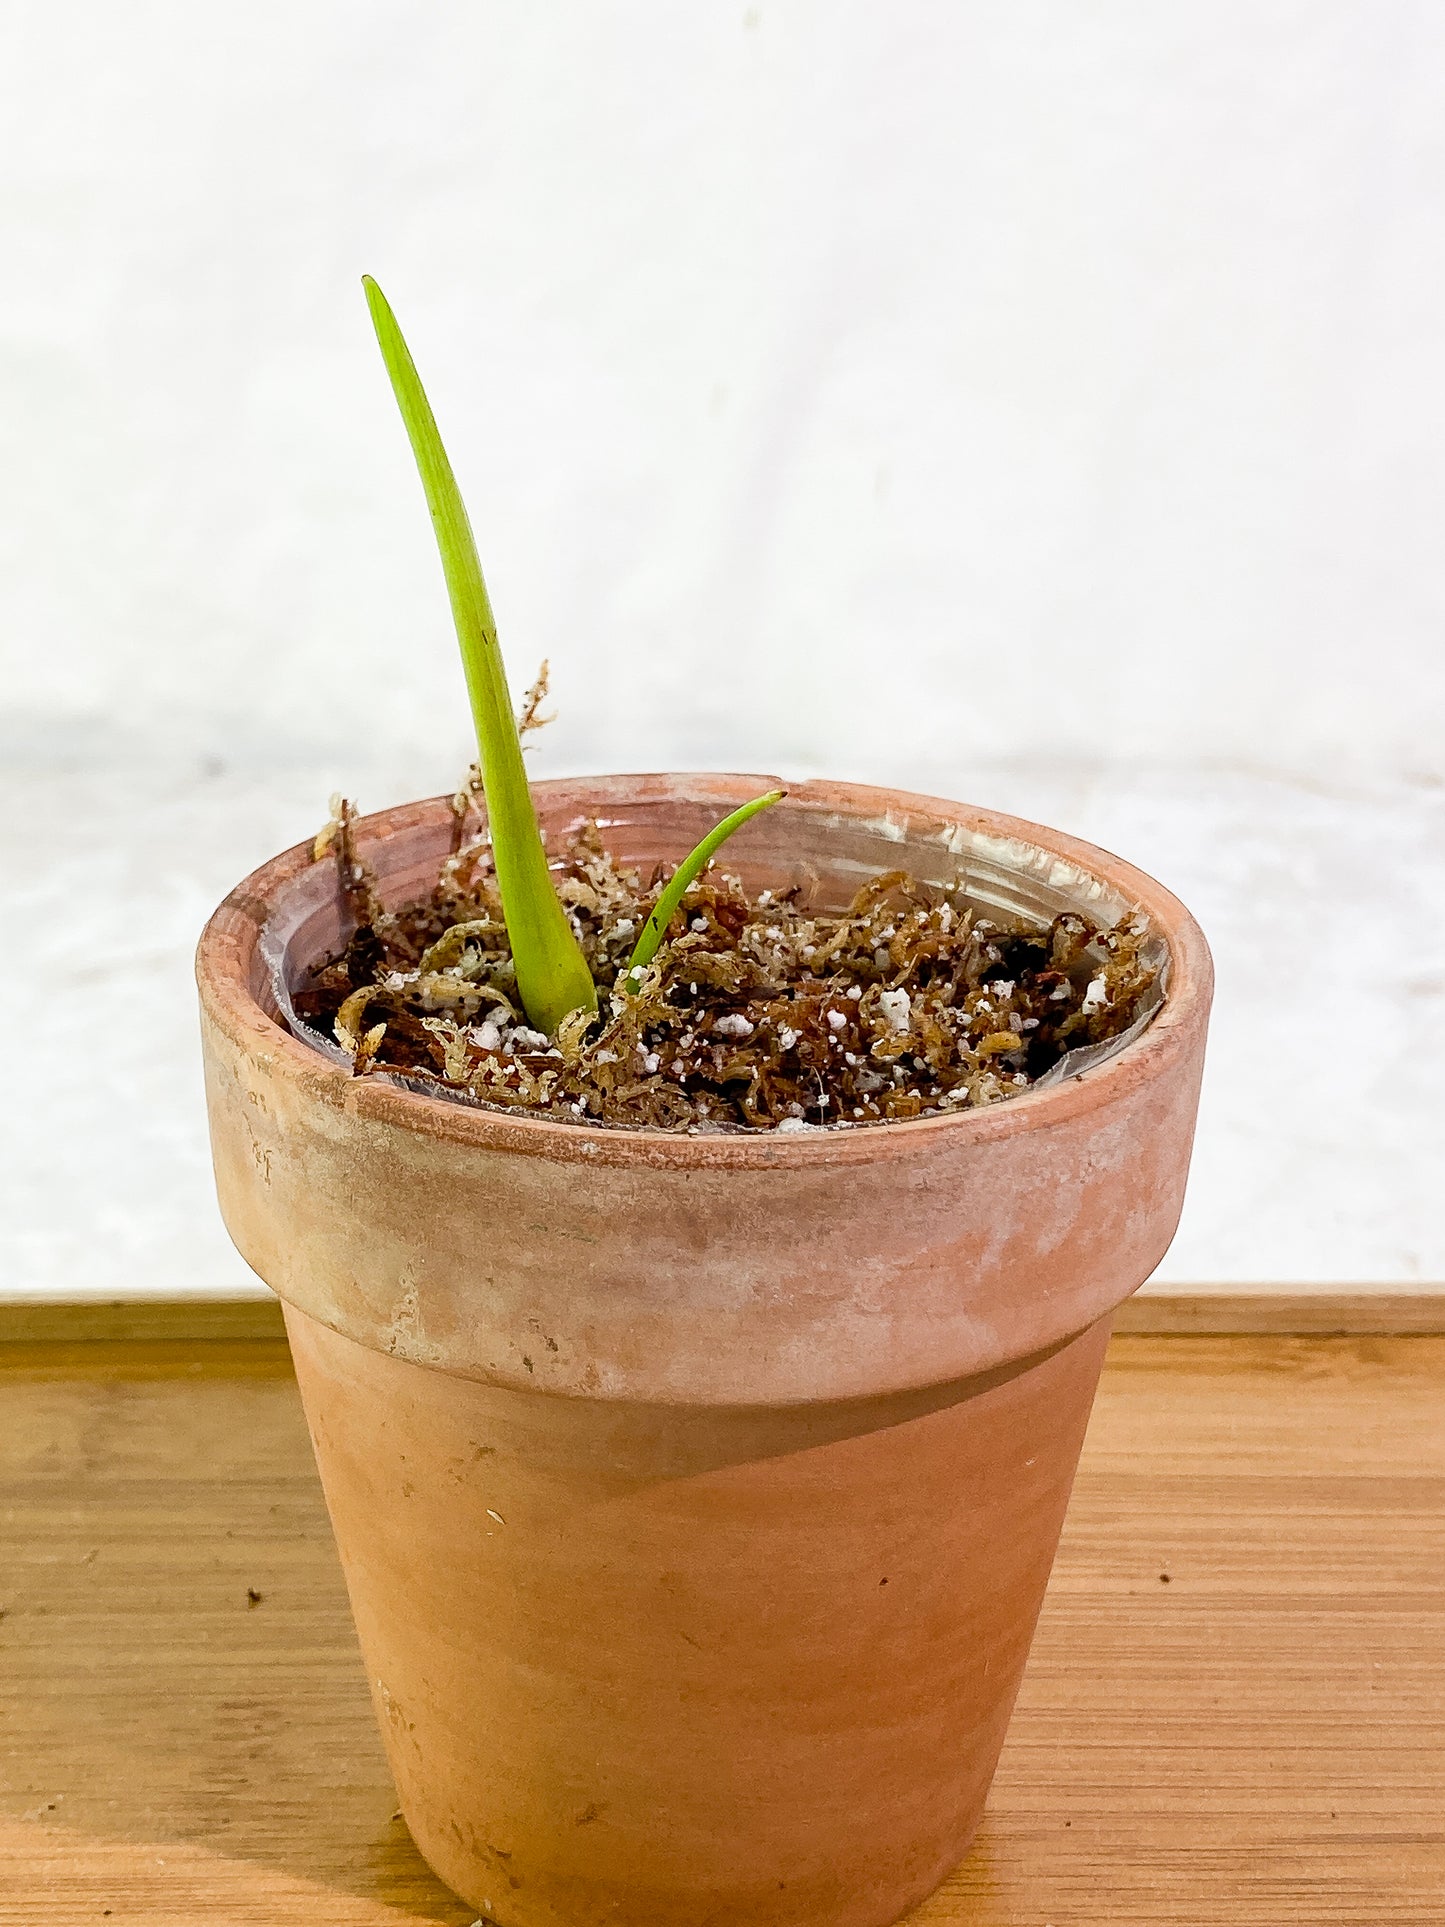 Philodendron Heterocraspedon rooting top cutting sprout